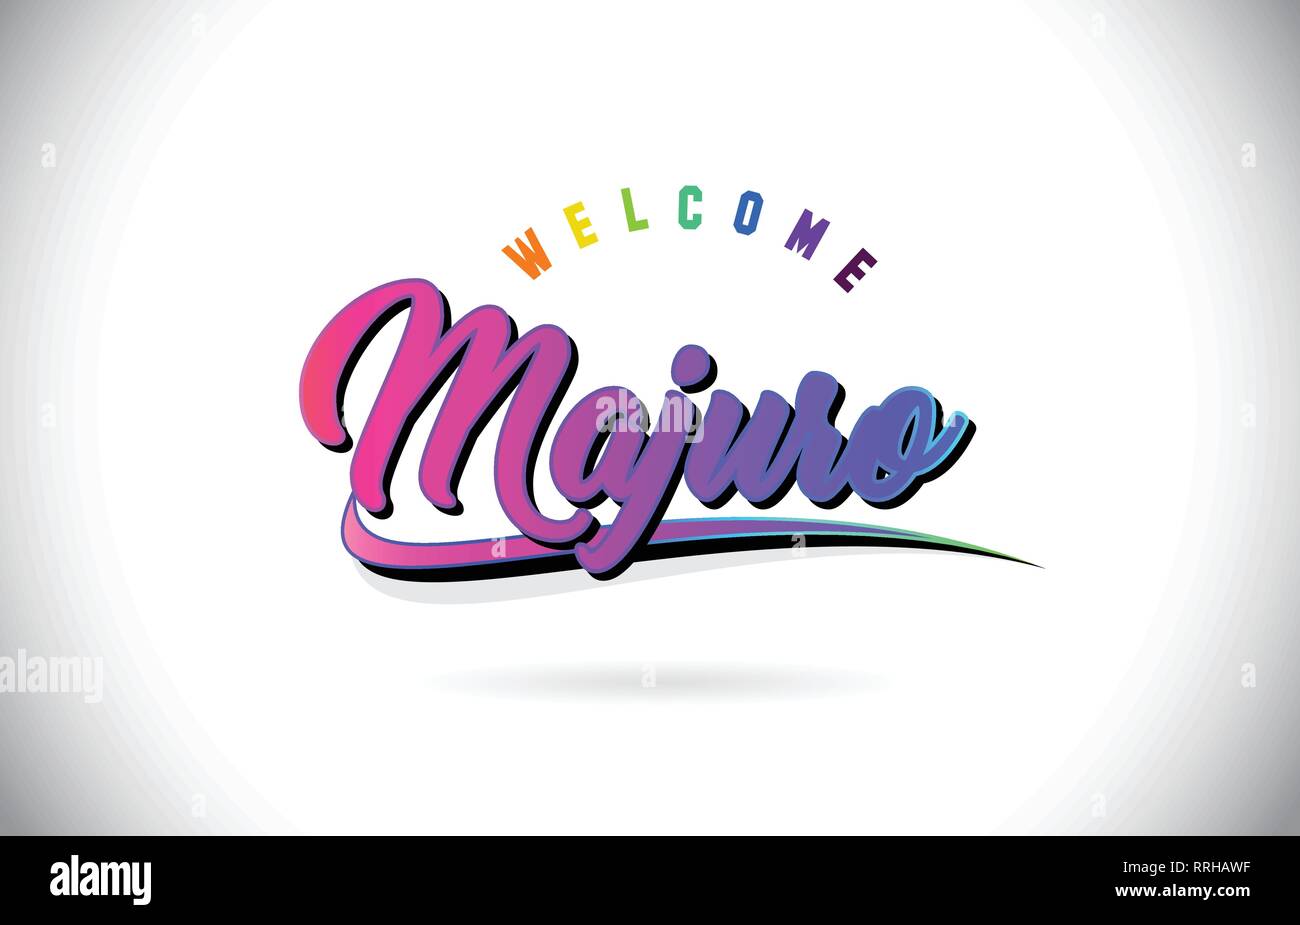 Majuro Welcome To Word Text with Creative Purple Pink Handwritten Font and Swoosh Shape Design Vector Illustration. Stock Vector